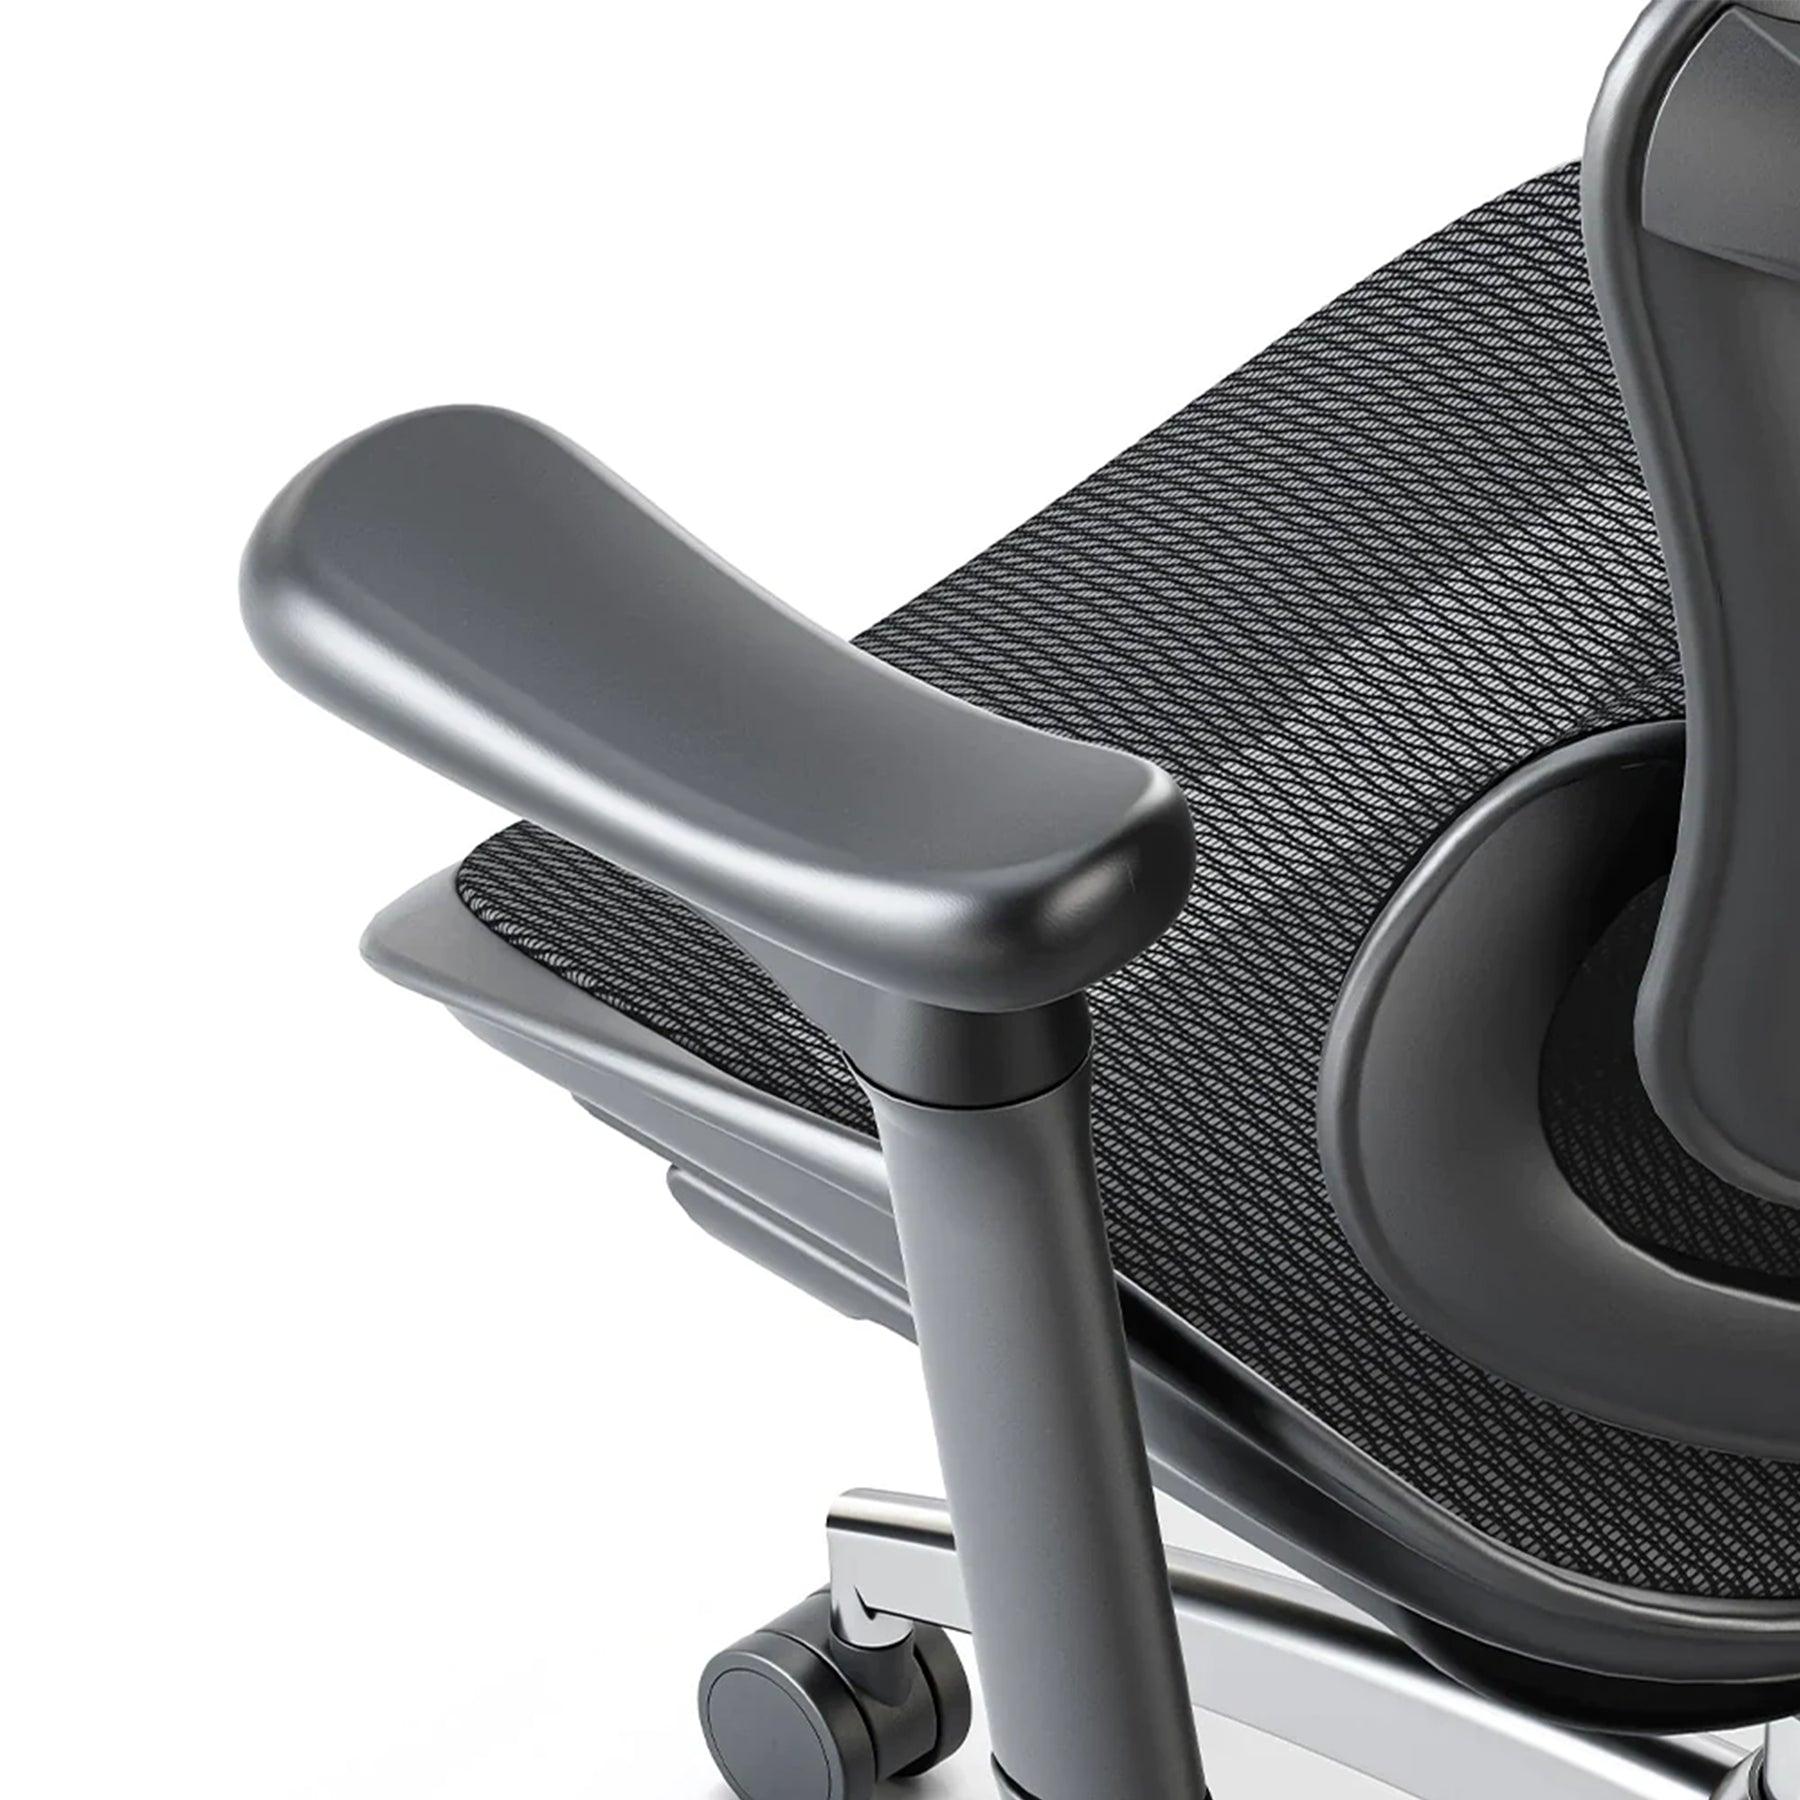  SIHOO Doro C300 Ergonomic Office Chair with Ultra Soft 3D  Armrests, Dynamic Lumbar Support for Home Office Chair, Adjustable Backrest  Desk Chair, Swivel Big and Tall Computer Chair Black : Home